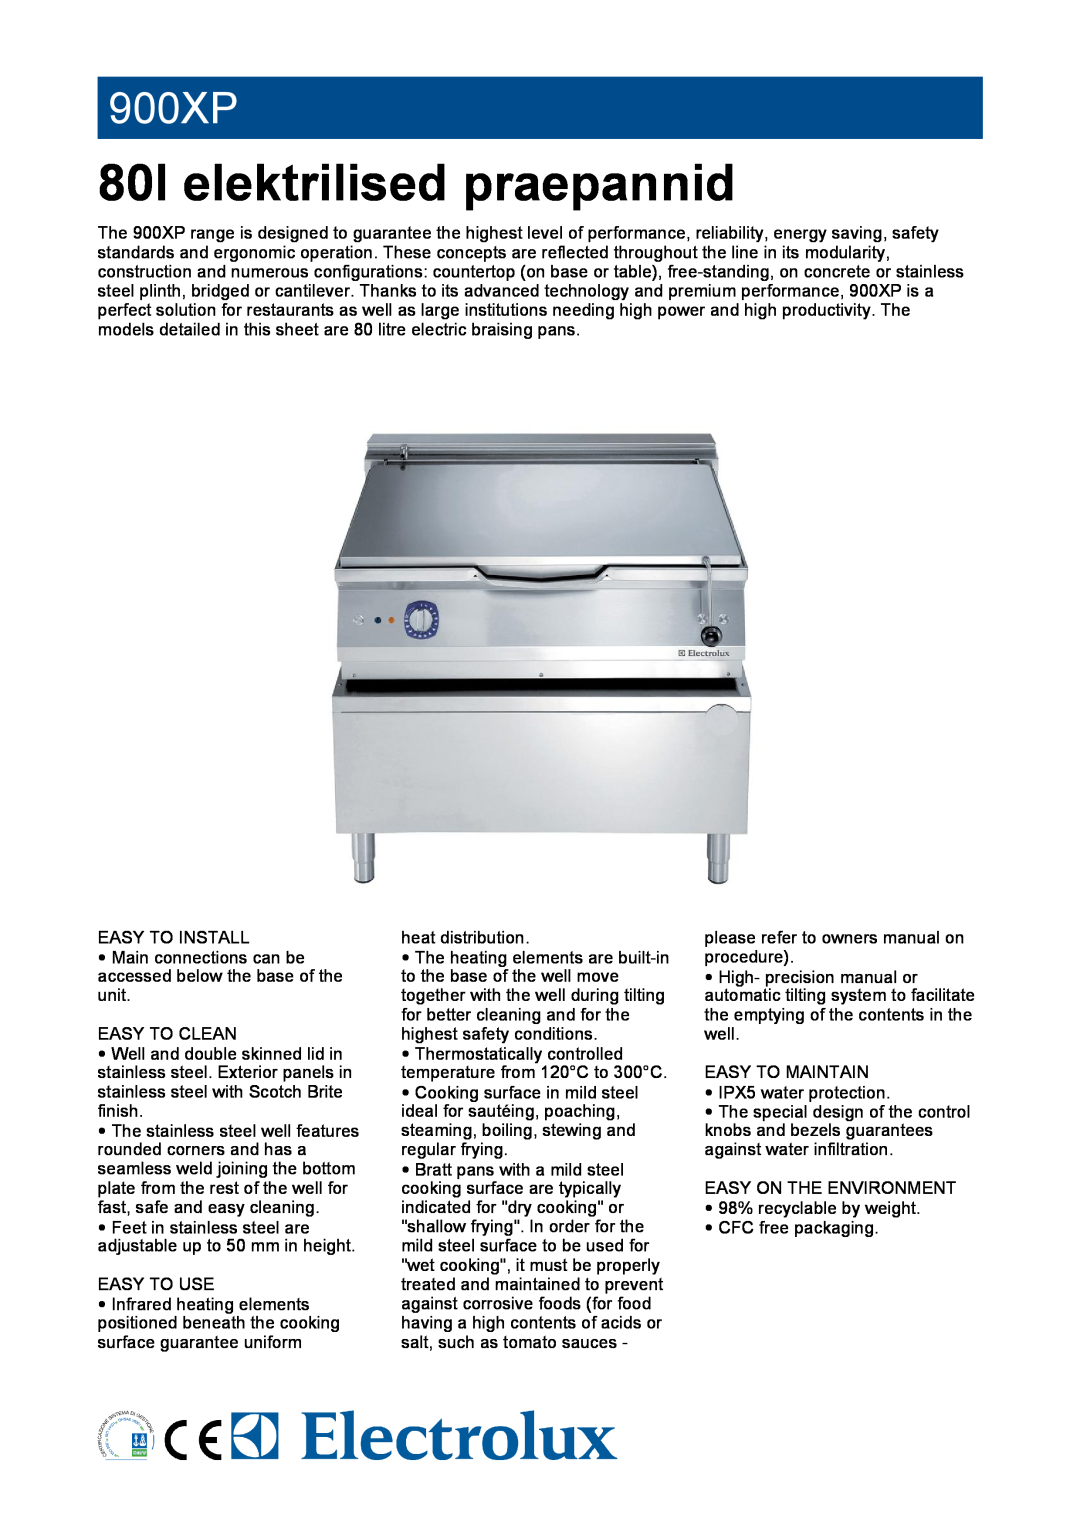 Electrolux 900XP manual Electric pasta cookers, institutions needing high power and productivity. The 